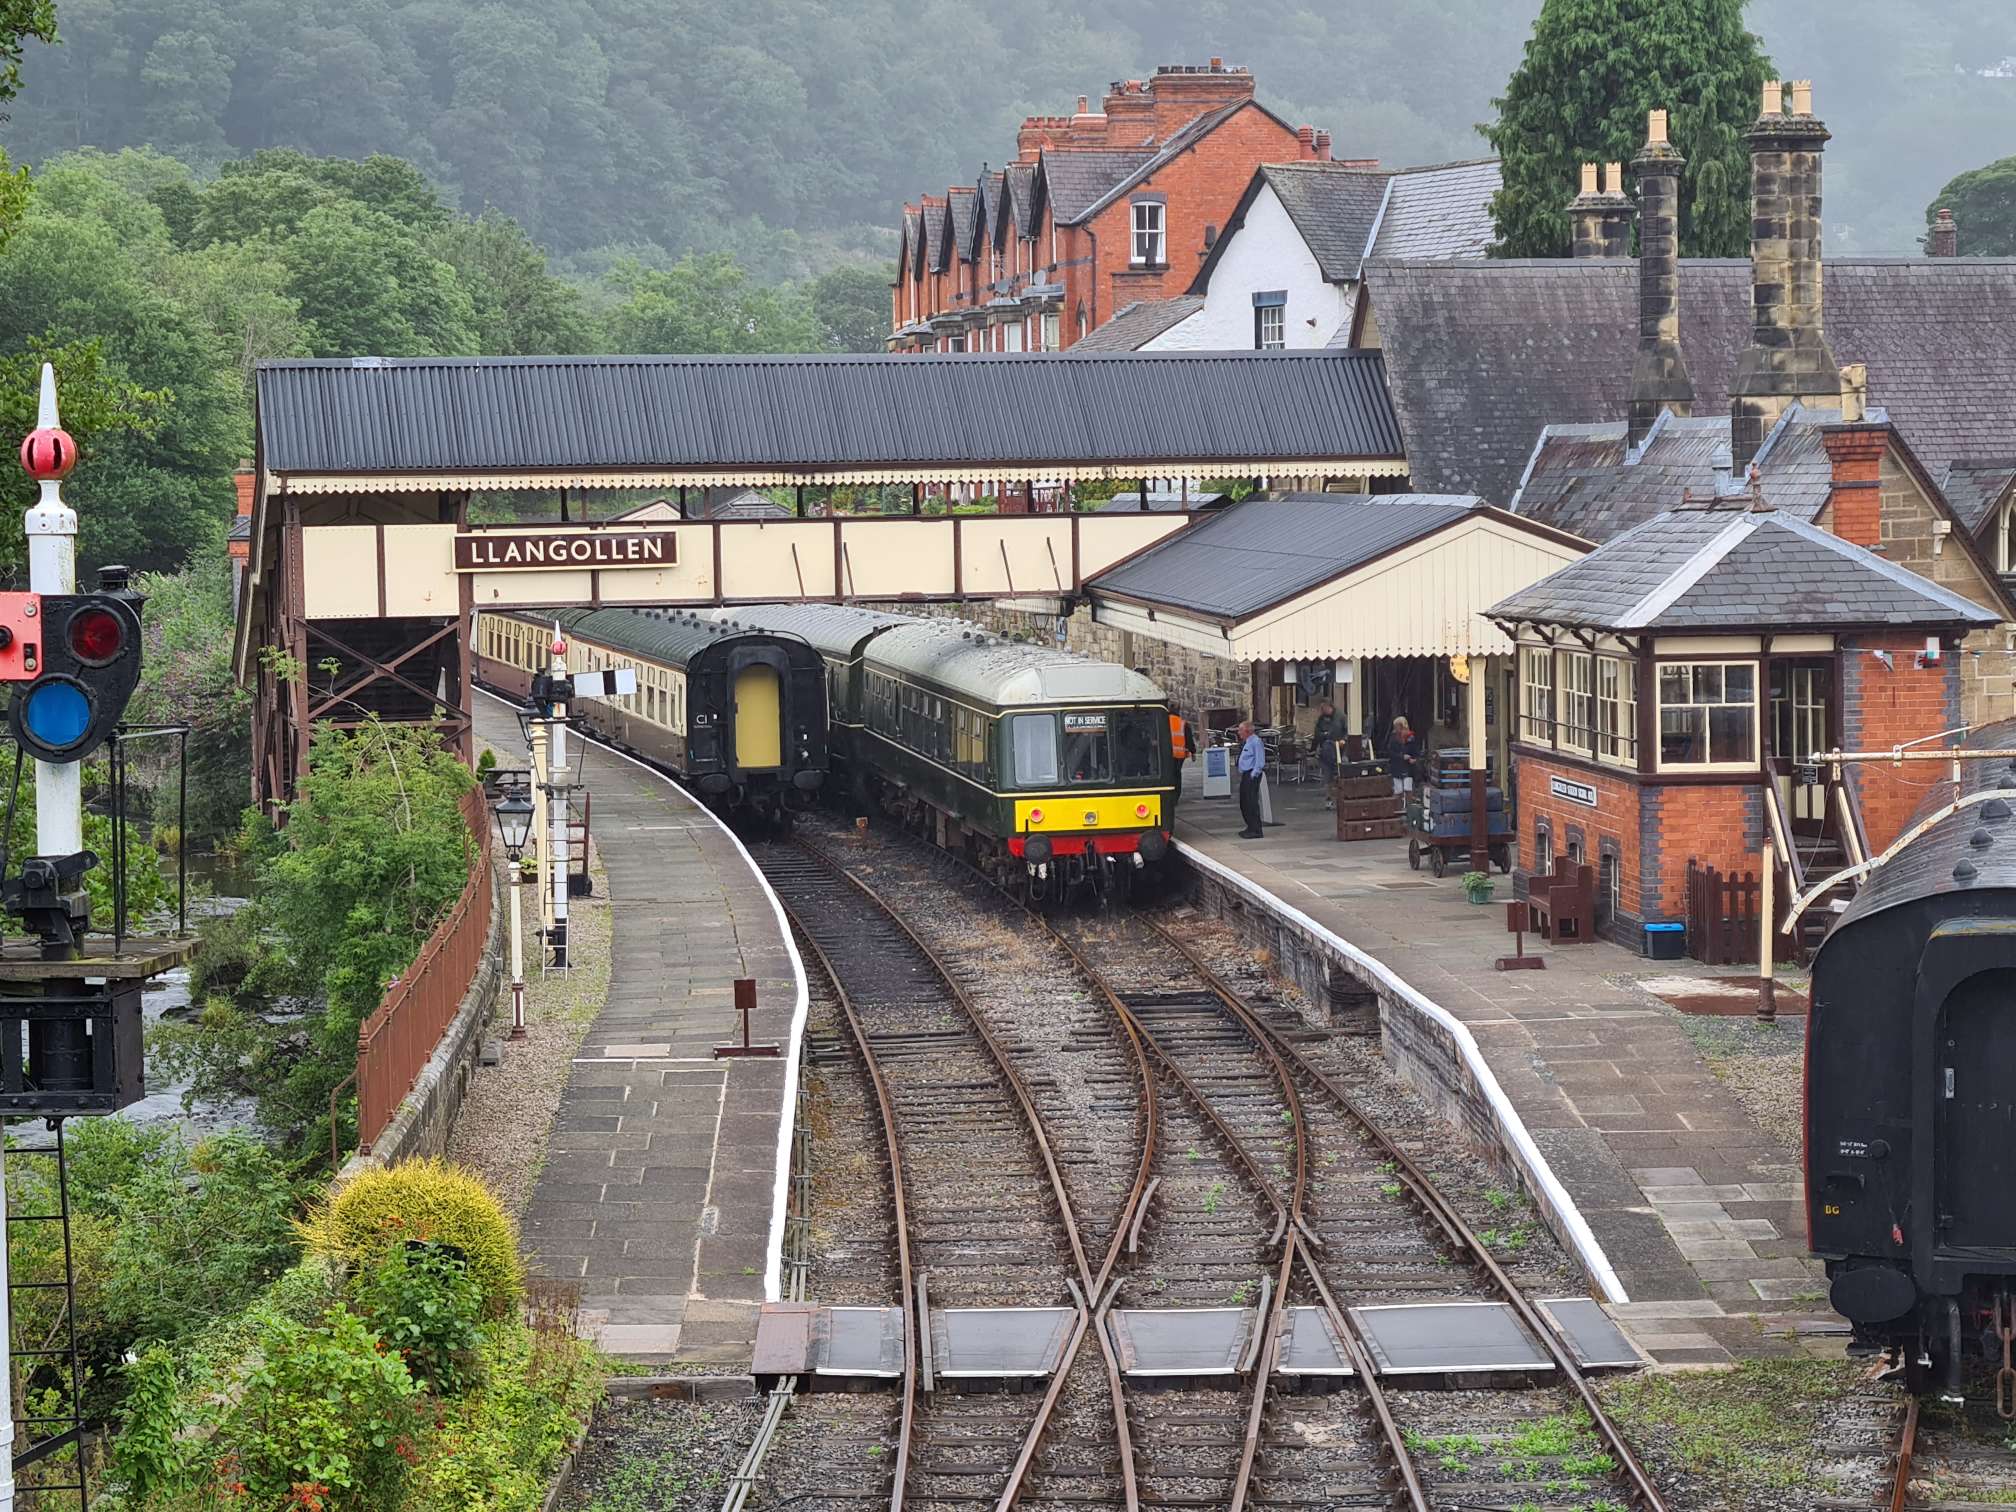 A picture of a train in Llangollen station